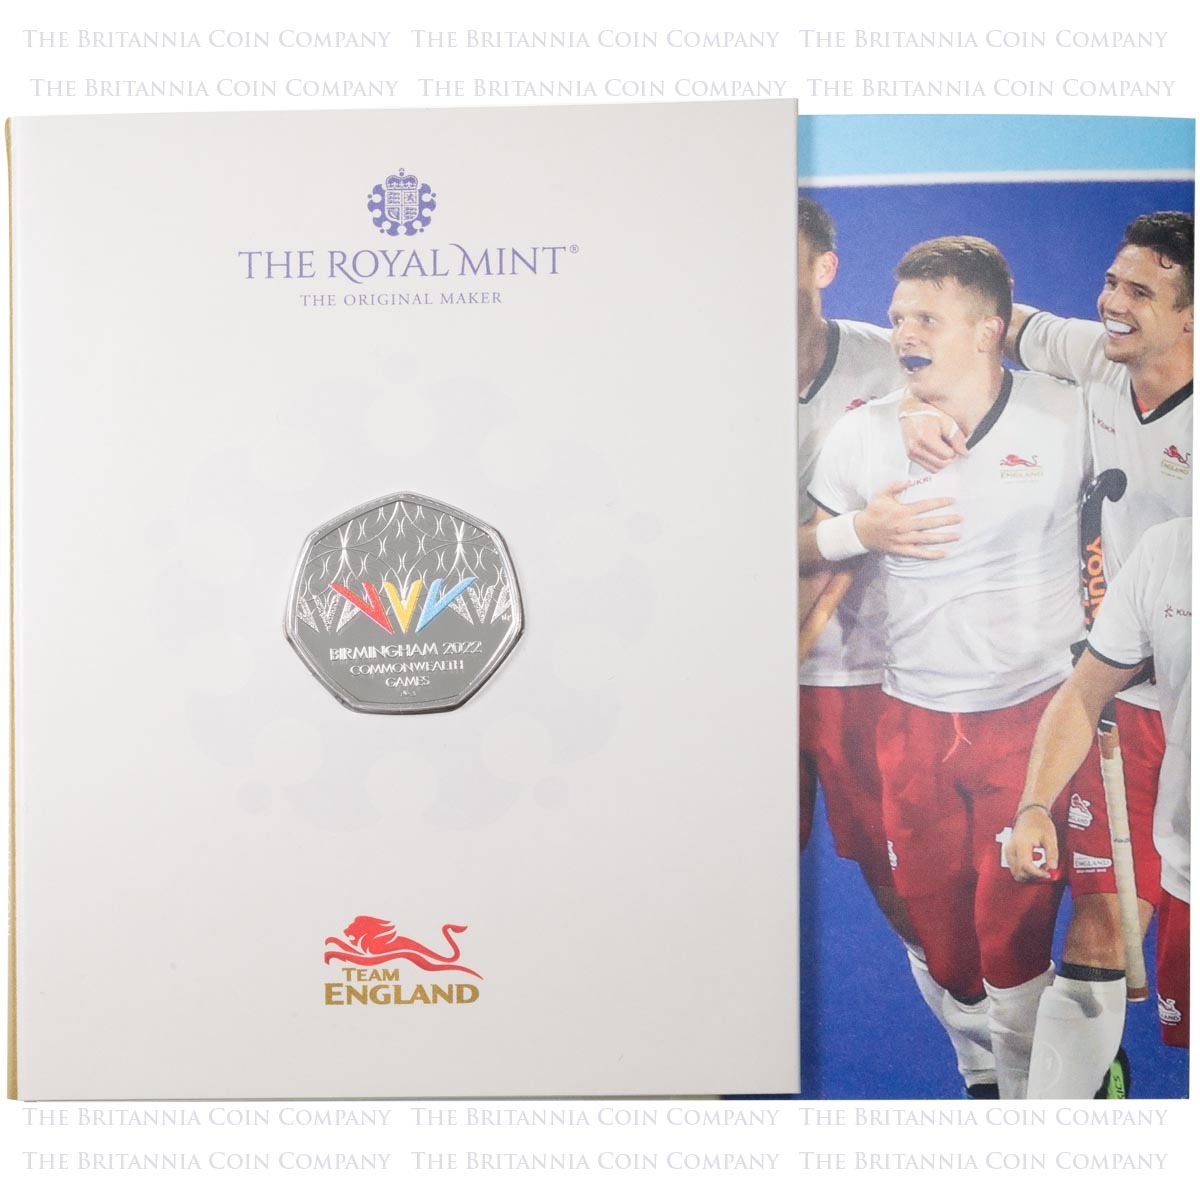 uk22cebc-2022-birmingham-commonwealth-games-team-england-edition-coloured-brilliant-uncirculated-fifty-pence-coin-003-m